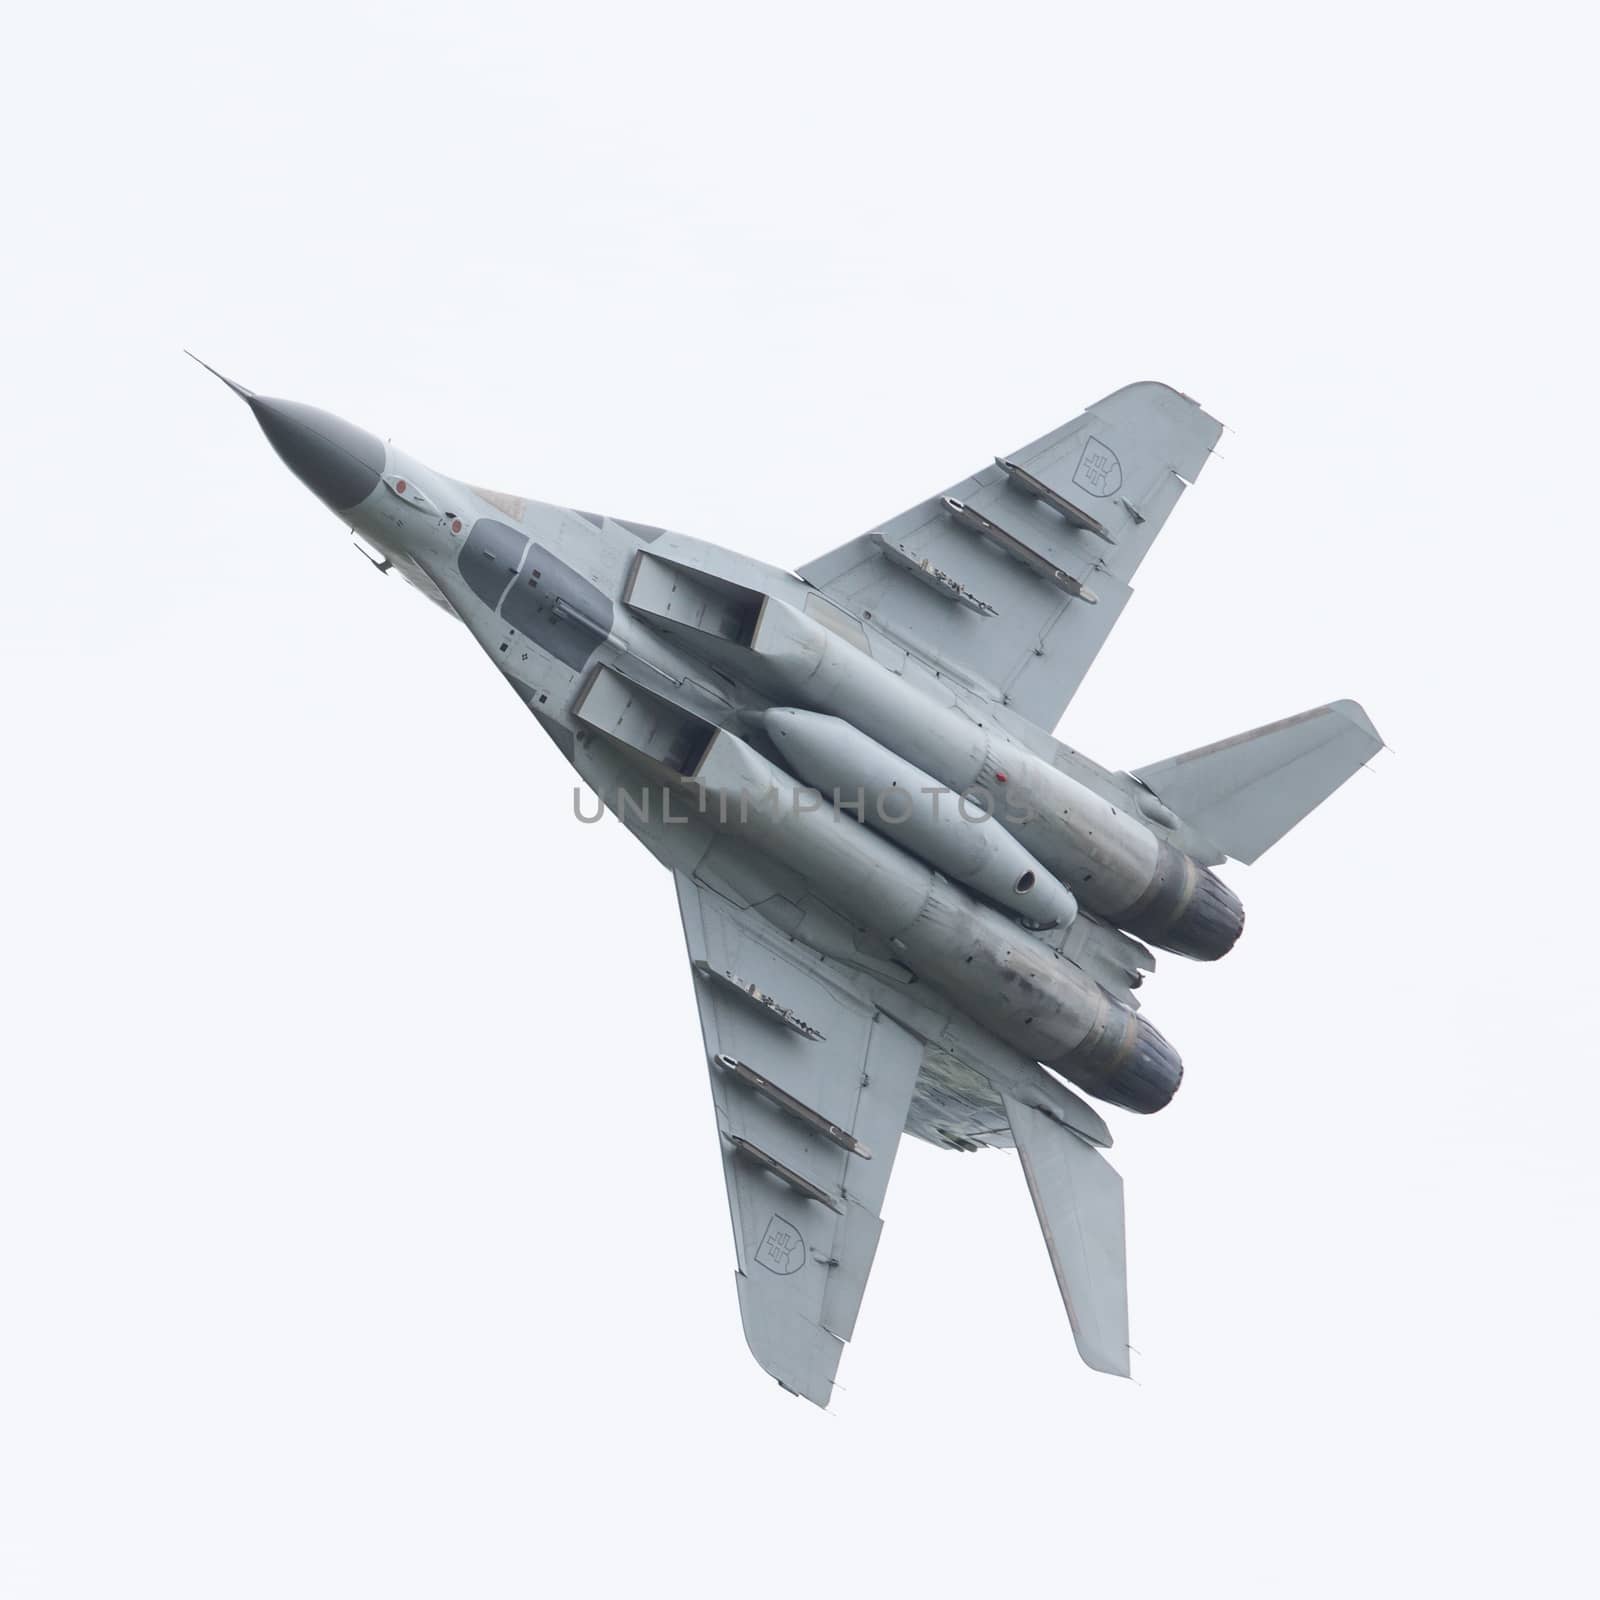 LEEUWARDEN, THE NETHERLANDS - JUNE 10, 2016: Slovak Air Force MiG-29 Fulcrum during a demonstration at the Royal Netherlands Air Force Days